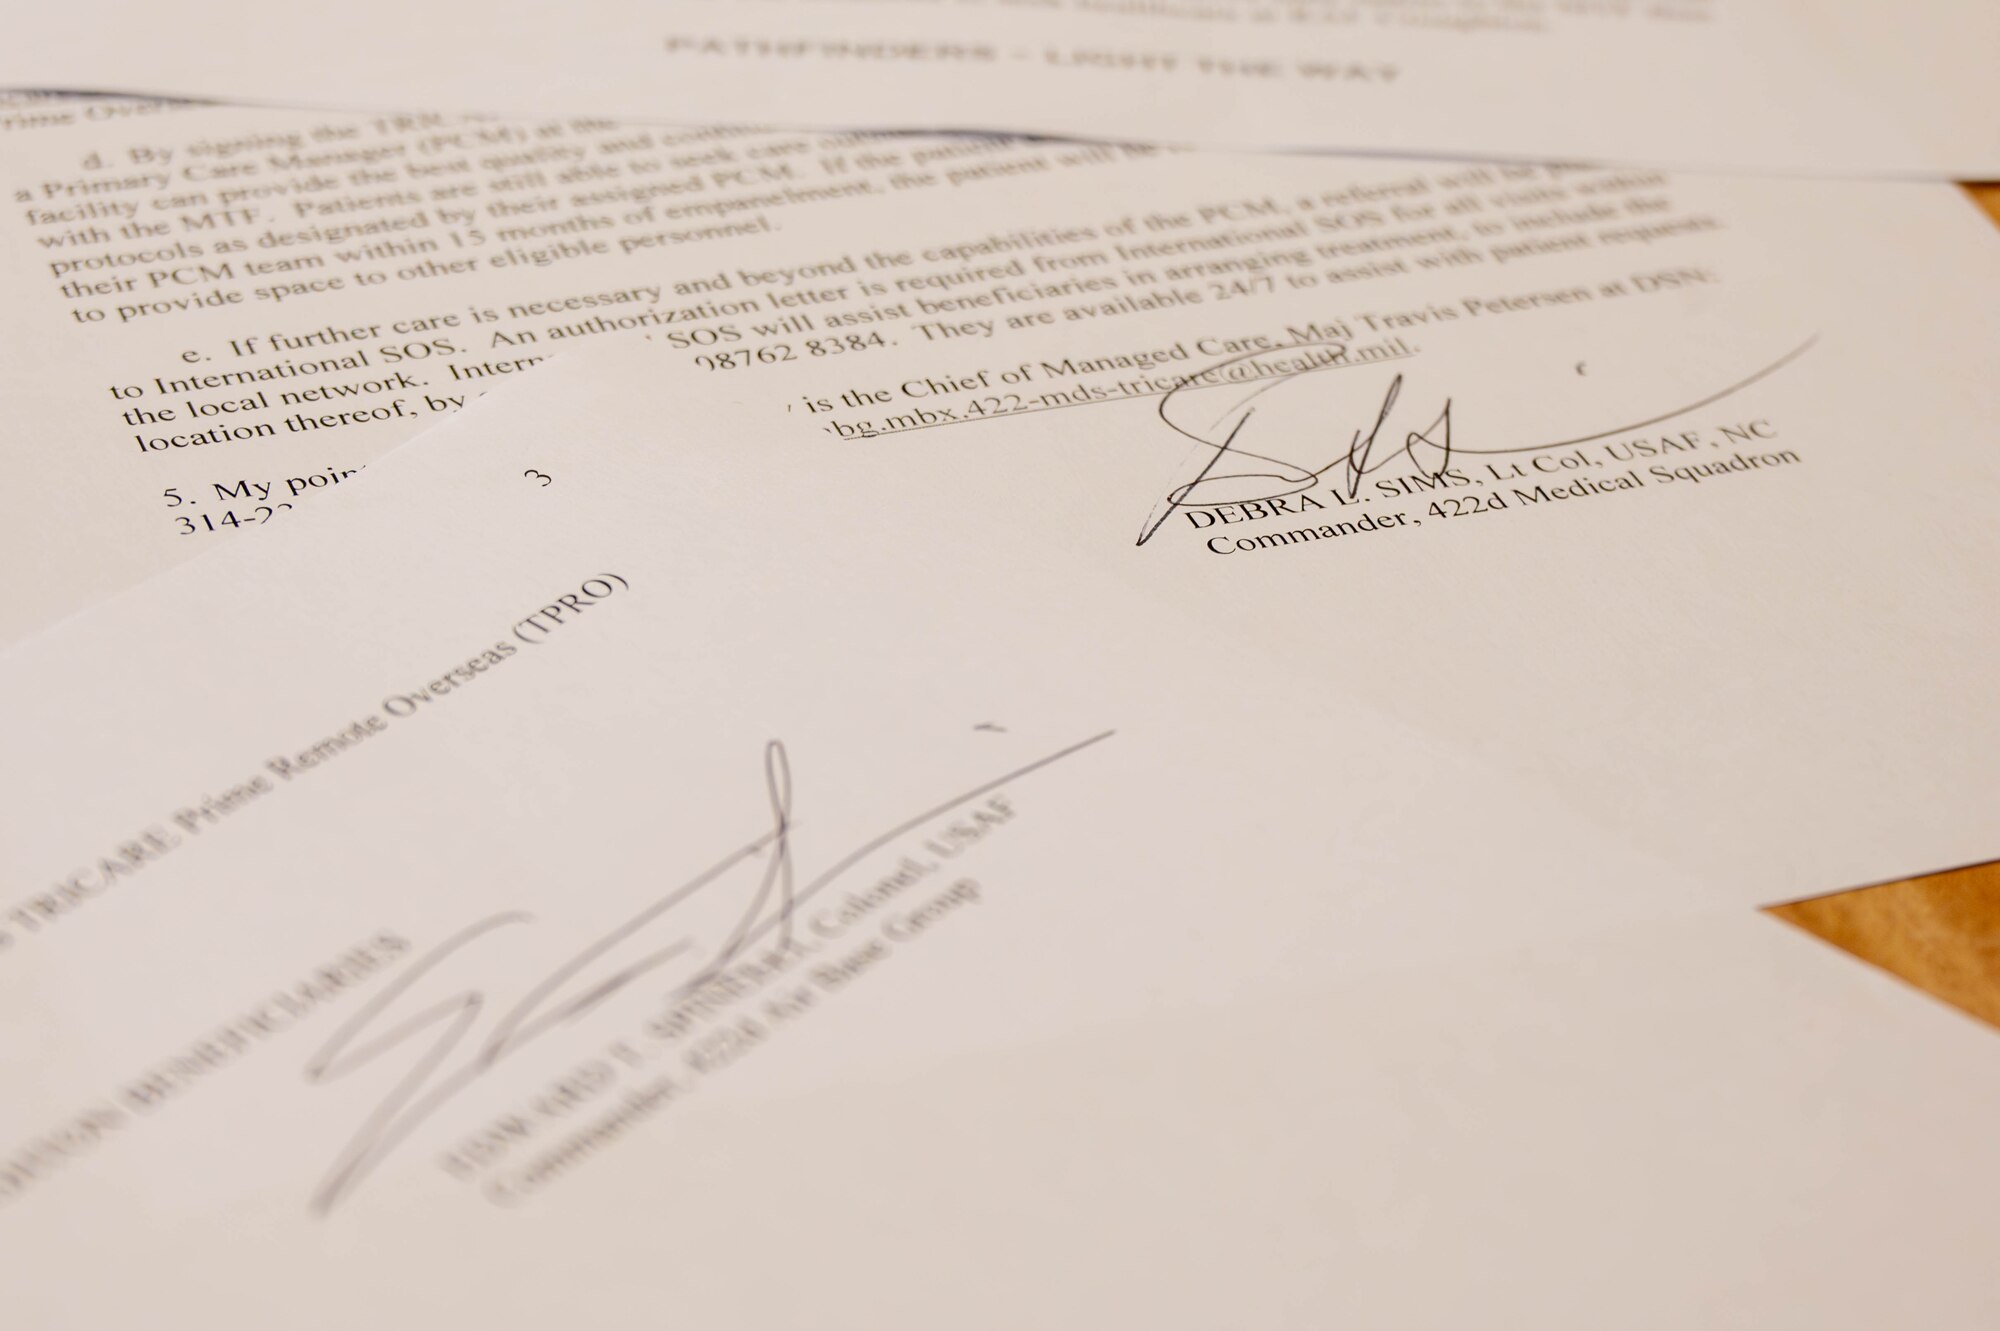 Signatures are seen on an exception to policy letter.